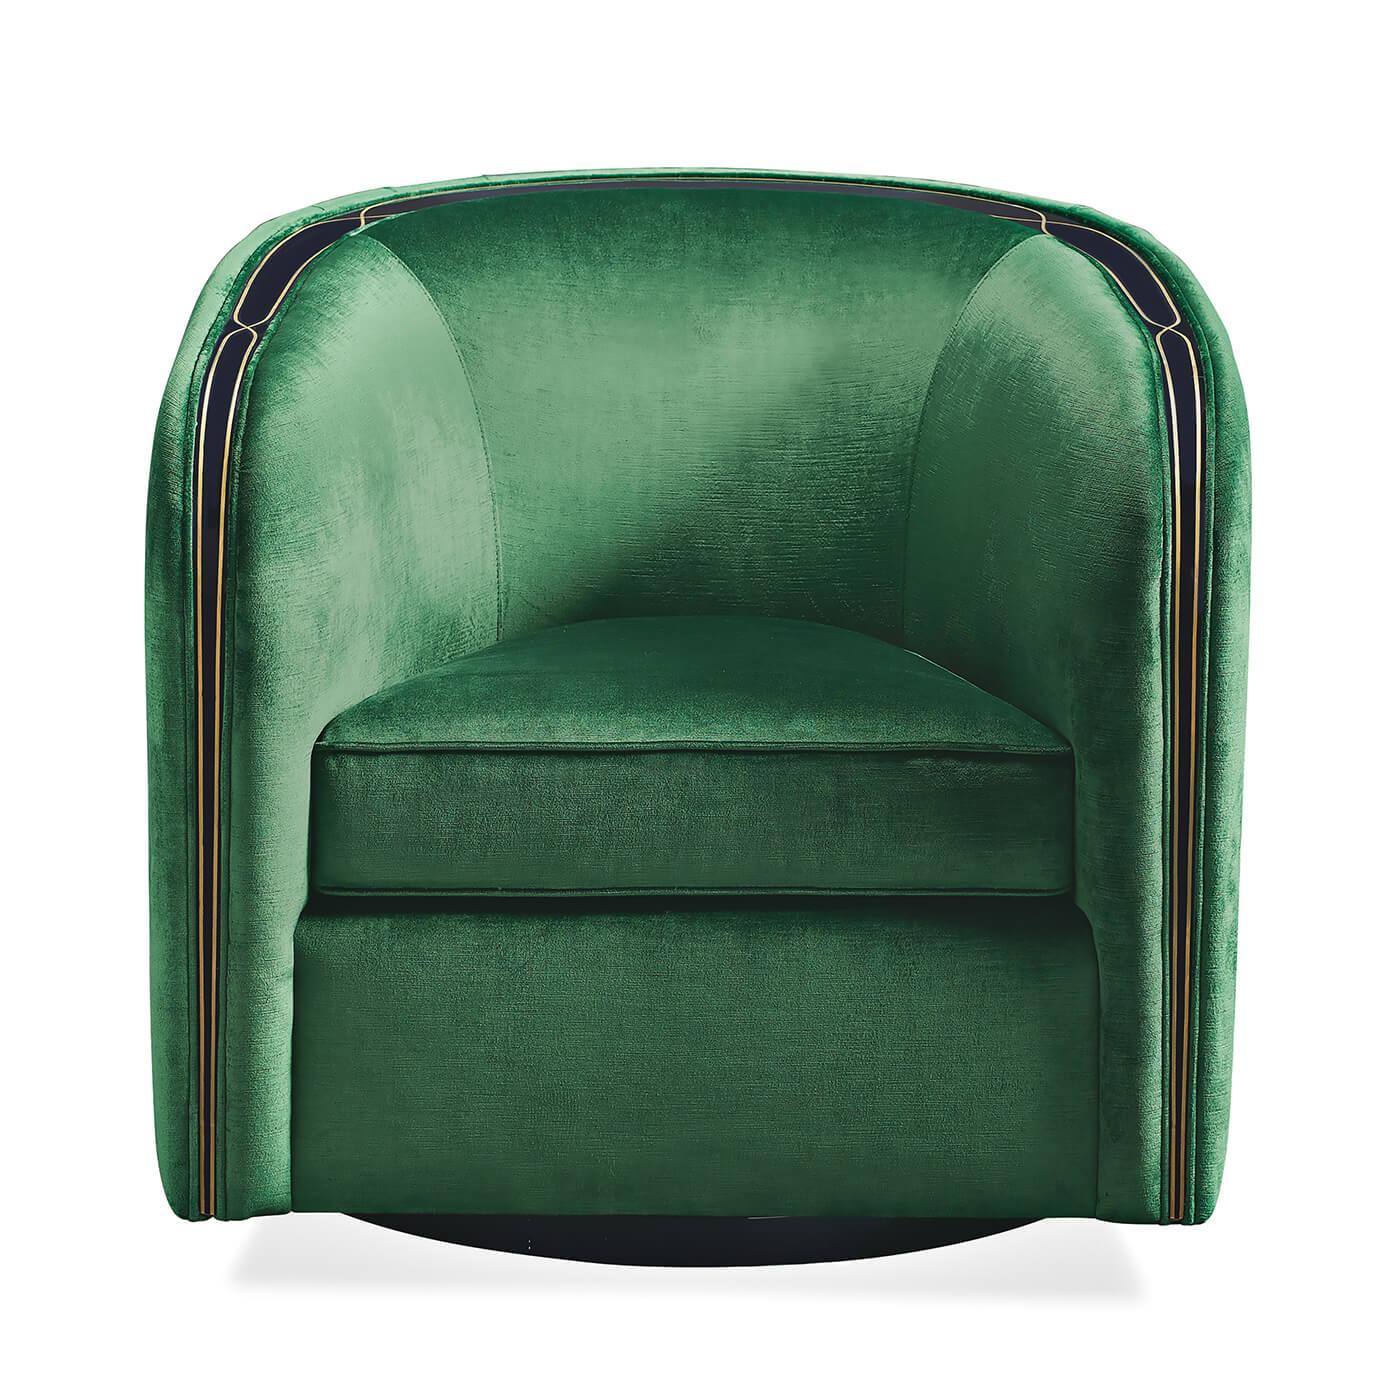 French Art Deco style emerald swivel base armchair. This armchair is glamour personified! Couture detail, a contemporary curving silhouette and fashionable upholstery define this eye-catching chair. It's upholstered in vibrant emerald green velvet.